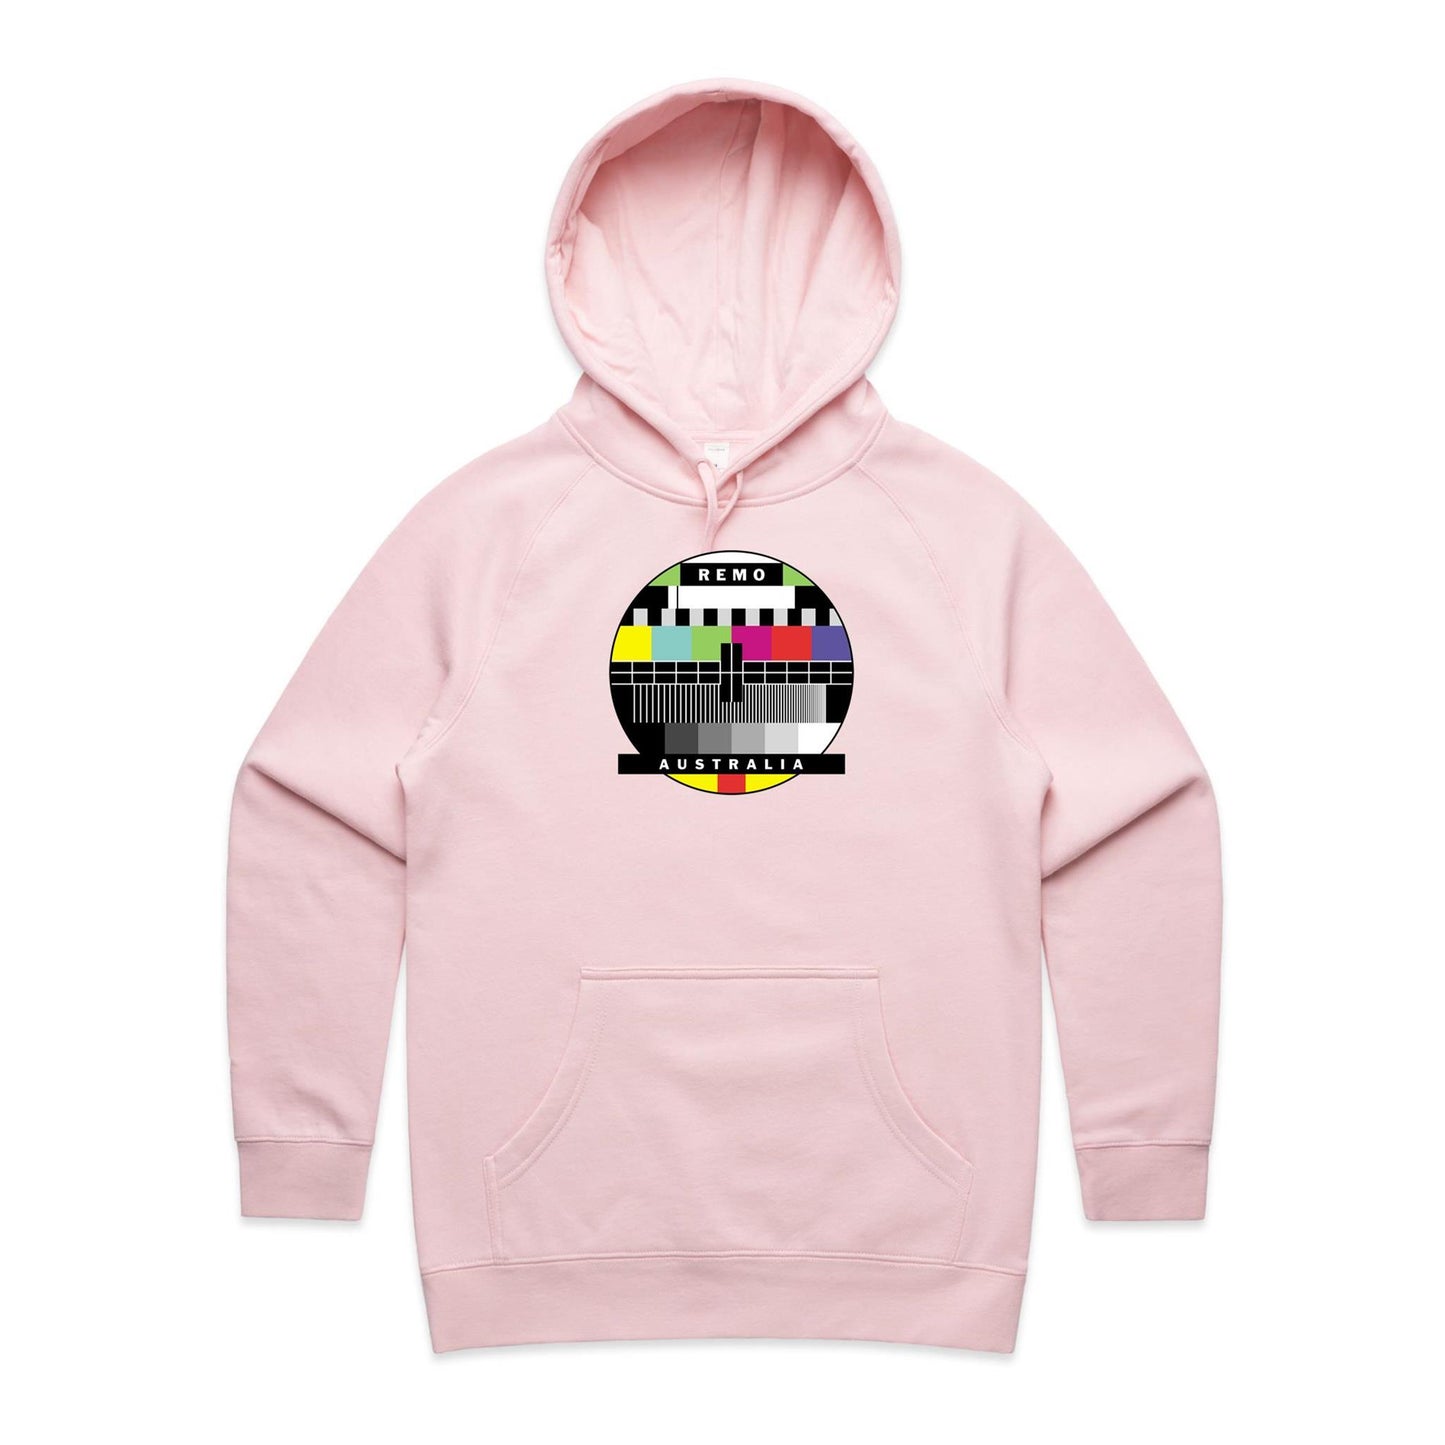 REMO TV Hoodies for Women